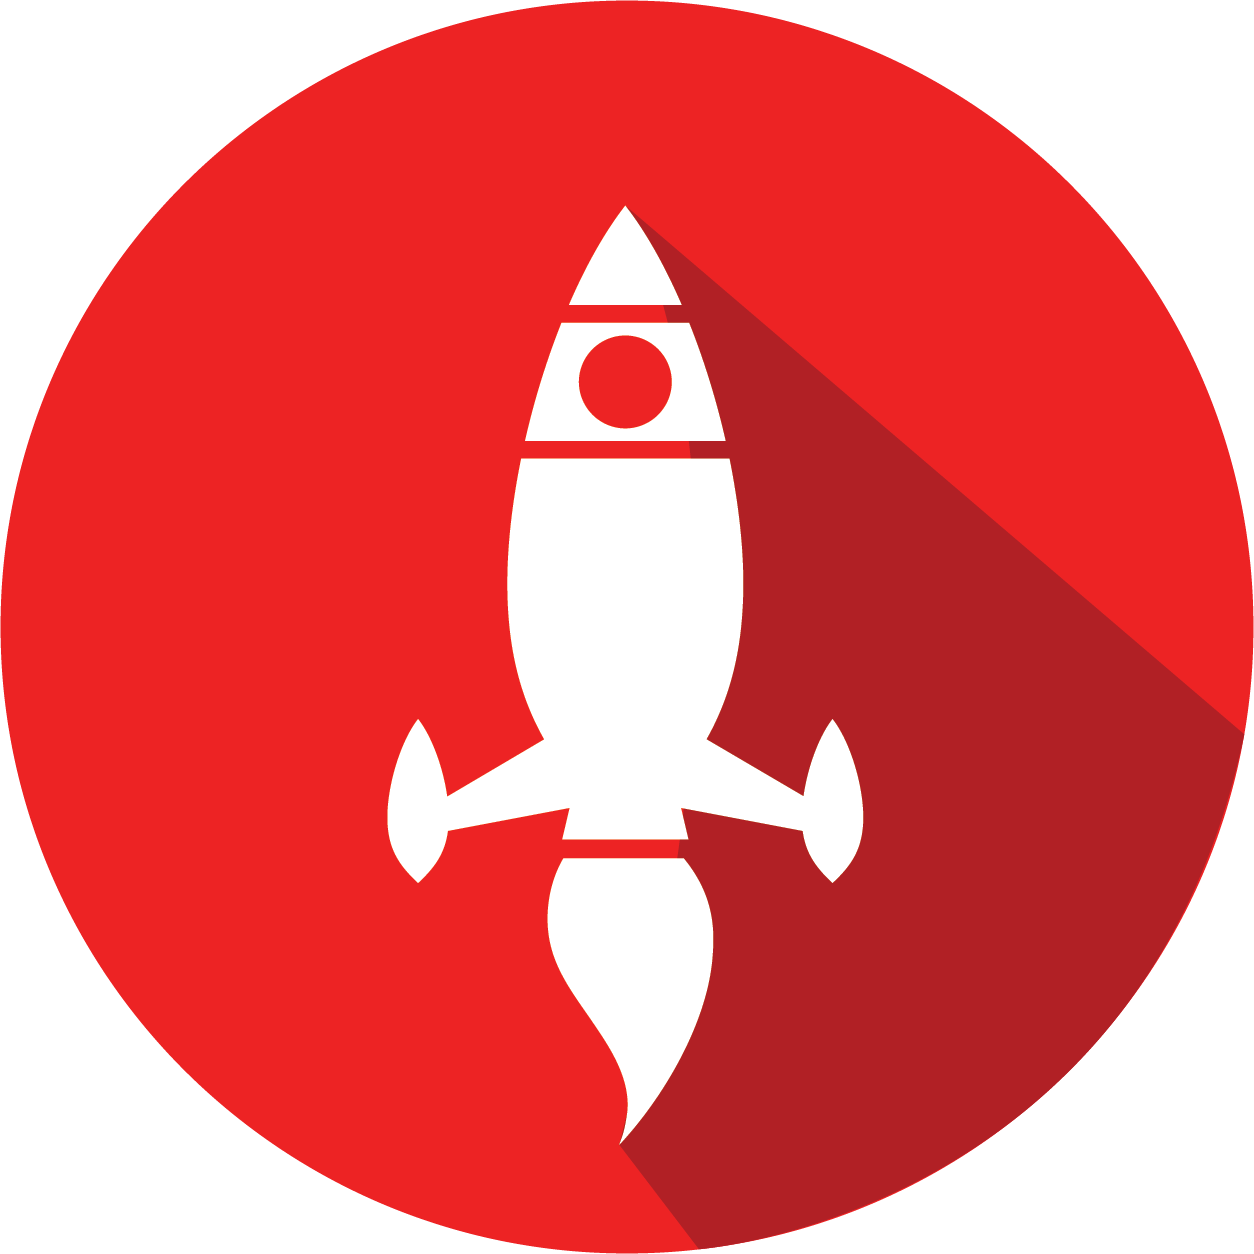 A White Rocket In A Red Circle